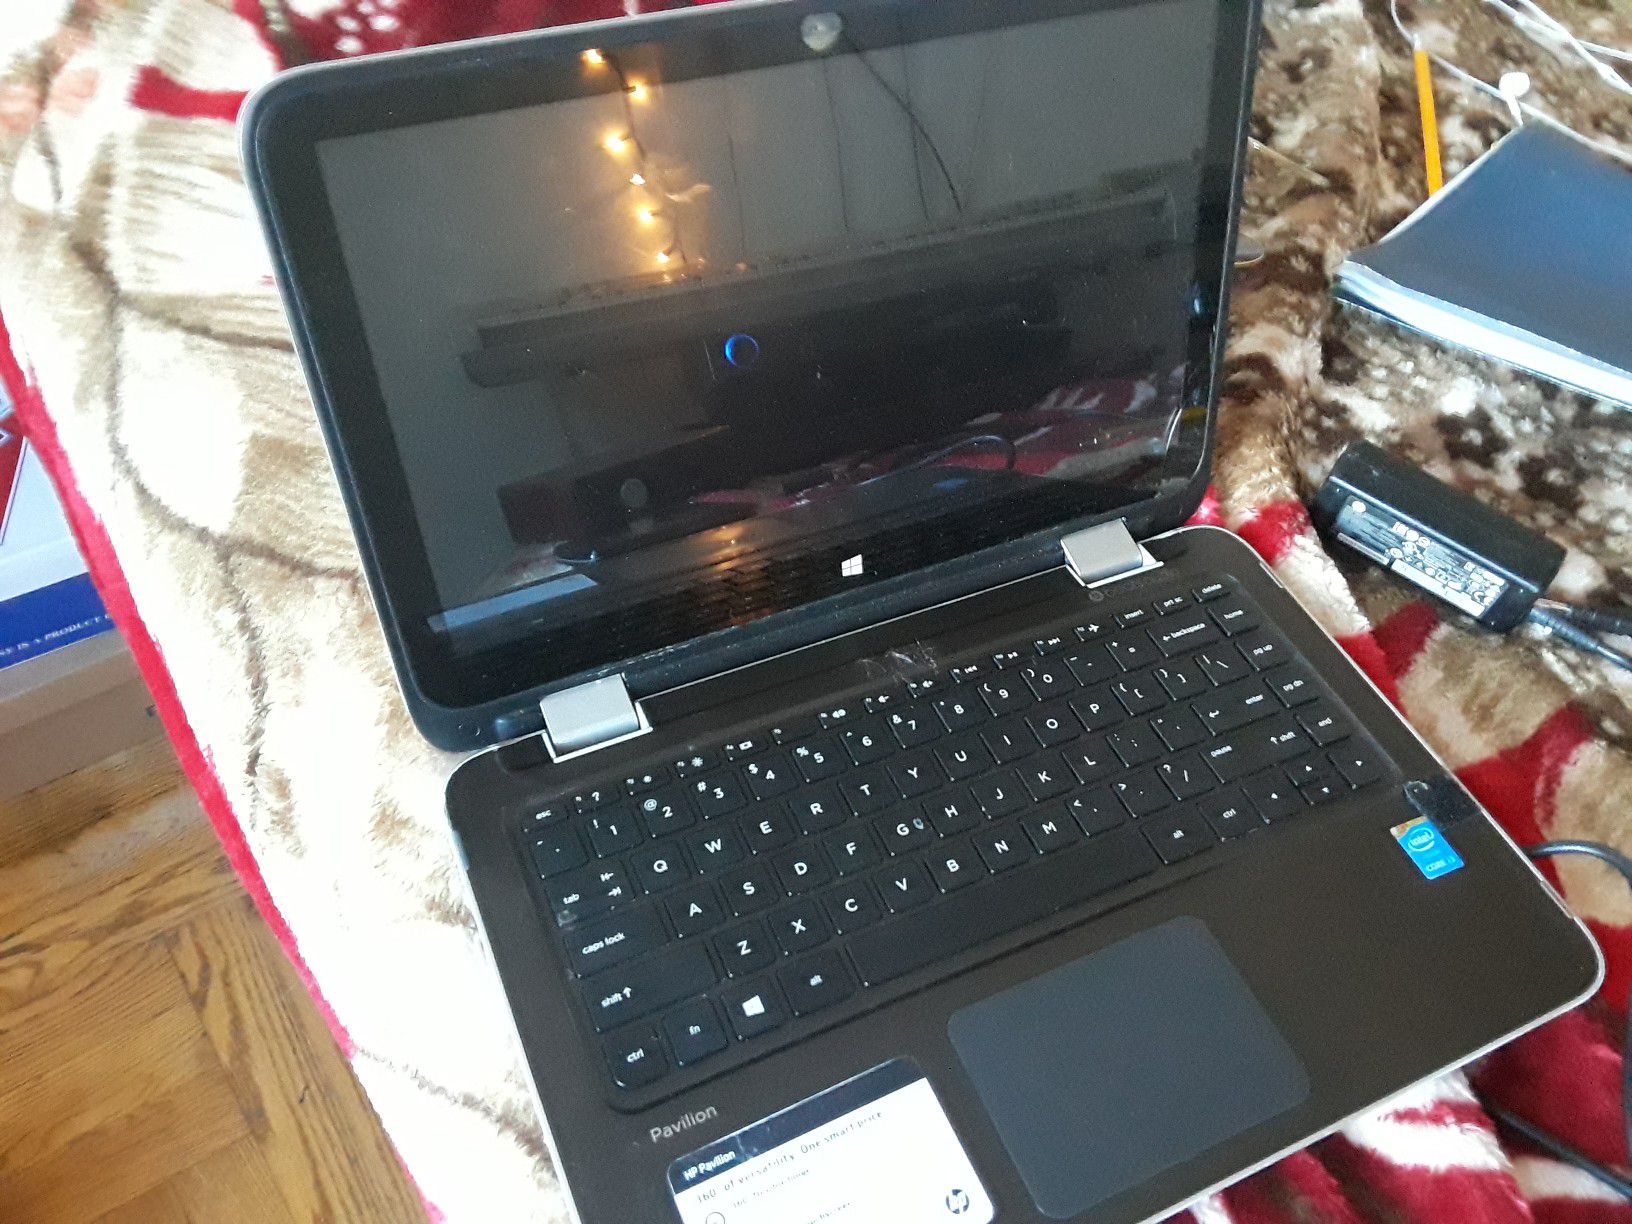 HP PAVILION BEATS STUDIO LAPTOP W/WINDOWS 10 for Sale in Bronx, NY - OfferUp